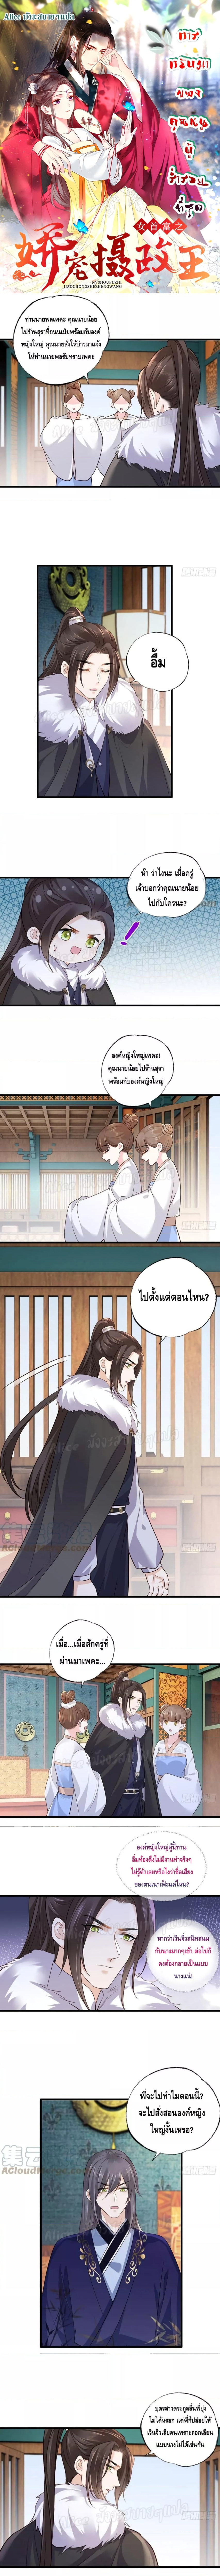 The Pampered Regent of The Richest Woman à¸à¸²à¸£à¸à¸¥à¸±à¸šà¸¡à¸²à¸‚à¸­à¸‡à¸„à¸¸à¸“à¸«à¸™à¸¹à¸œà¸¹à¹‰à¸£à¹ˆà¸³à¸£à¸§à¸¢à¸—à¸µà¹ˆà¸ªà¸¸à¸” à¸•à¸­à¸™à¸—à¸µà¹ˆ 129 (1)